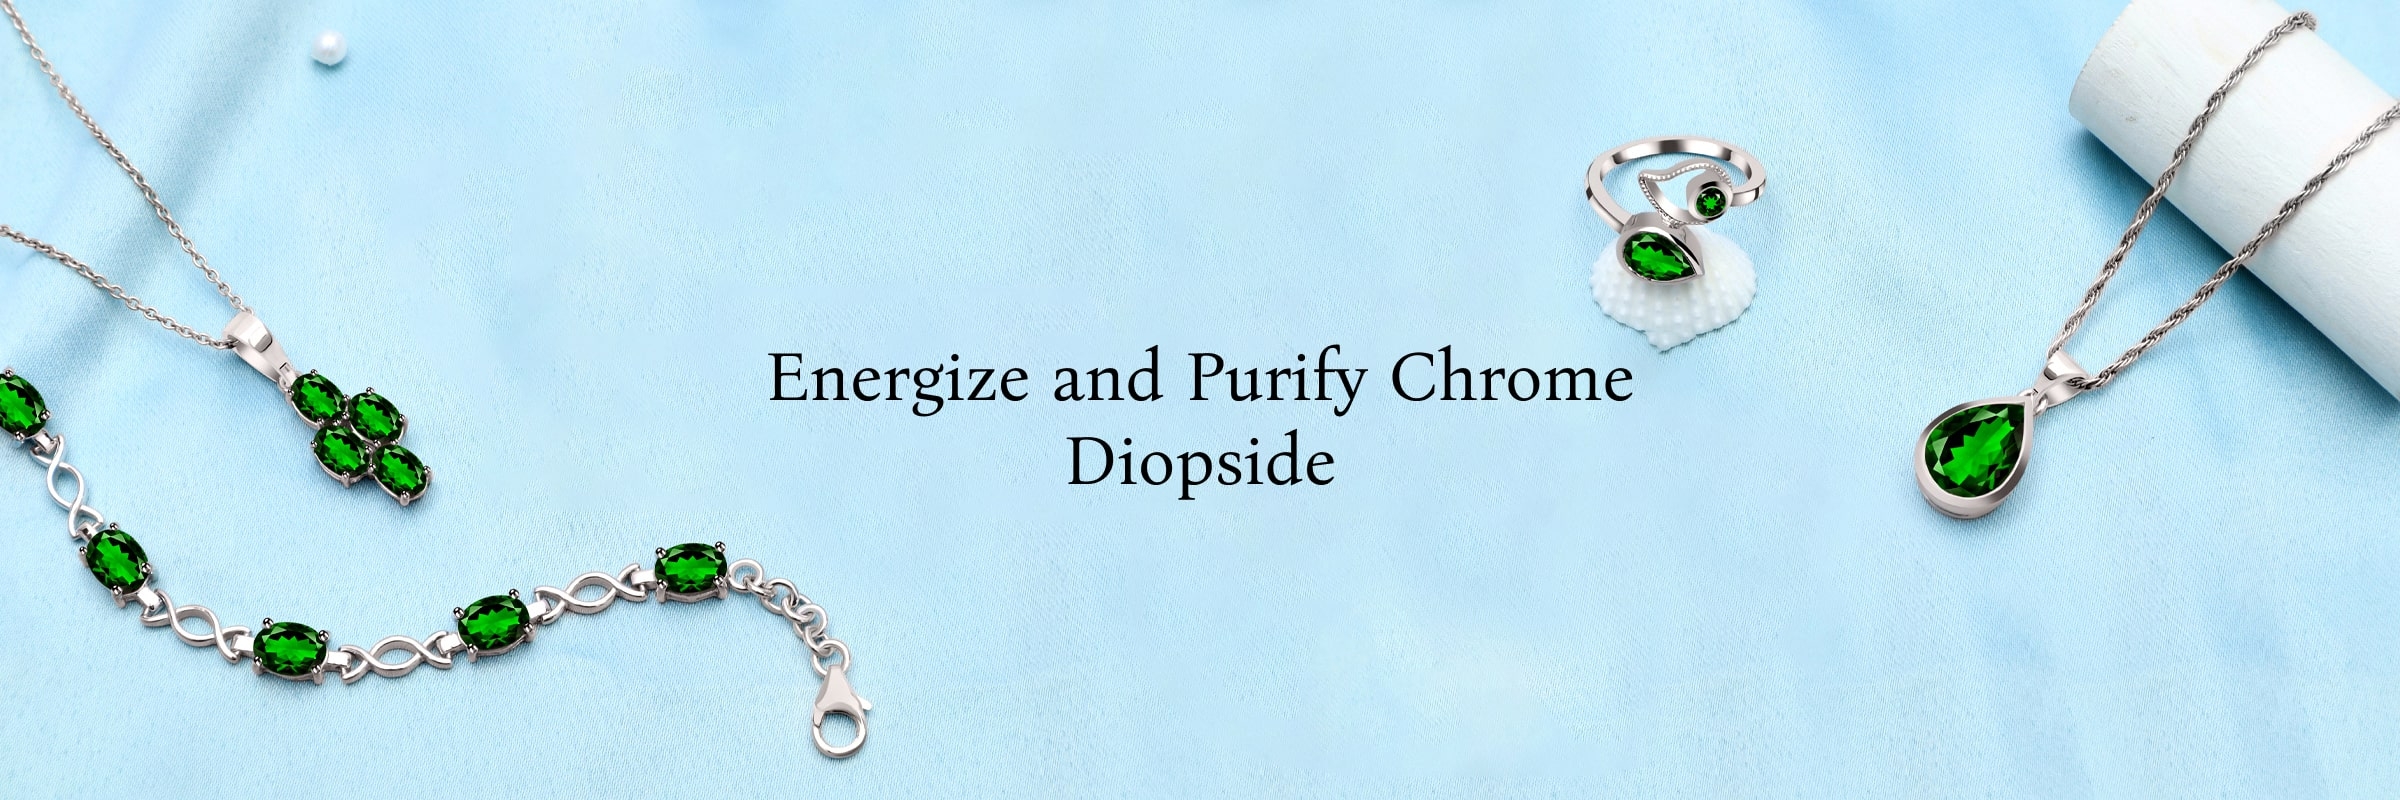 Chrome Diopside Charging and Cleansing